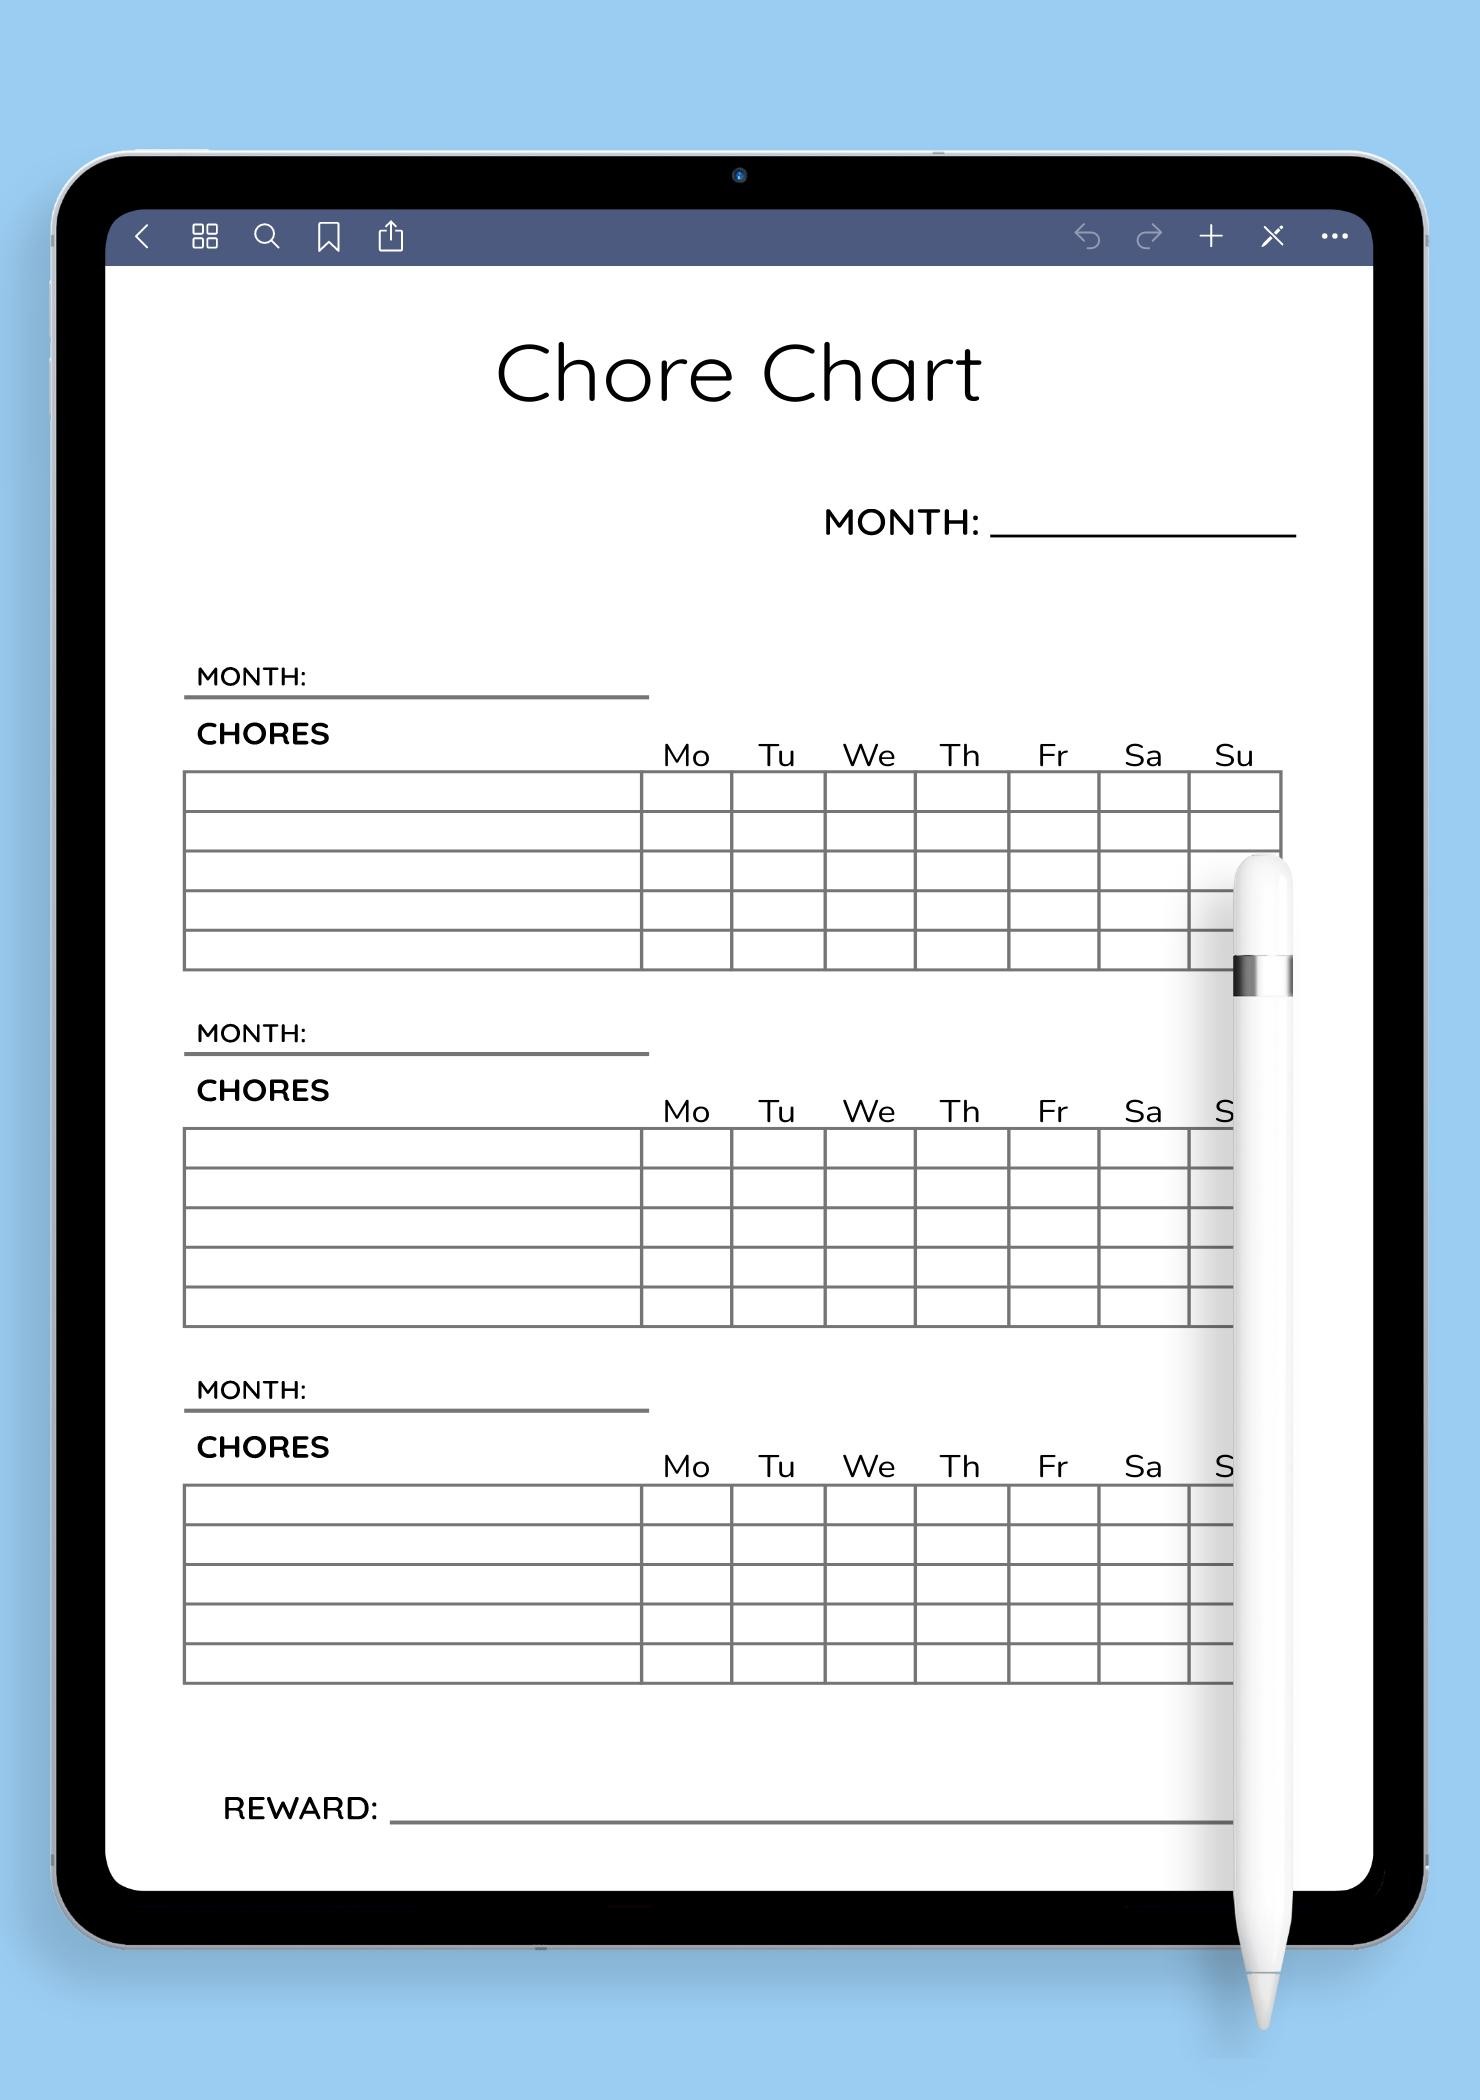 18 Printable Bra Size Chart Forms and Templates - Fillable Samples in PDF,  Word to Download